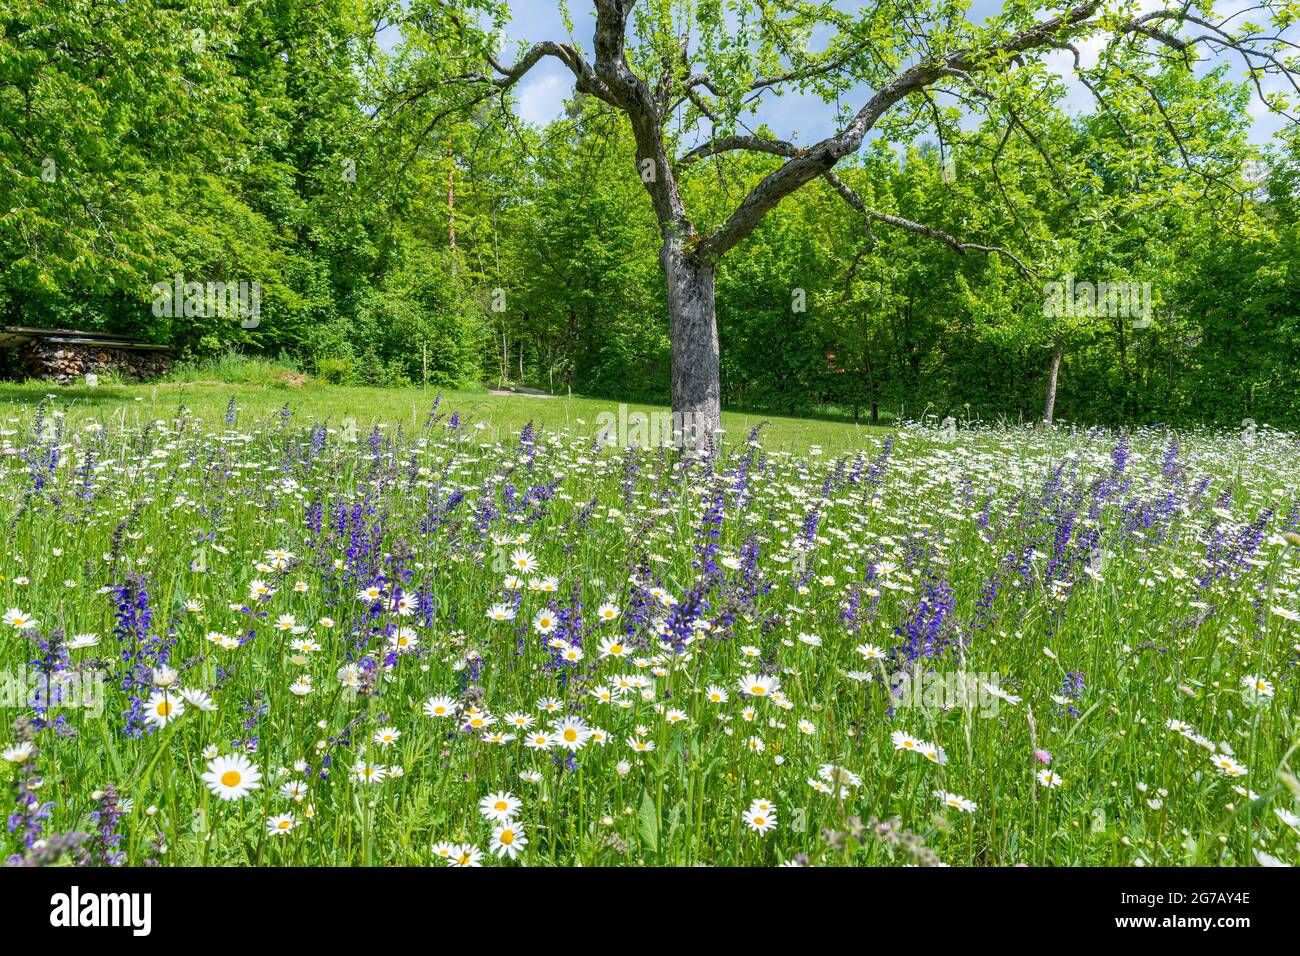 Germany, Baden-Wuerttemberg, Metzingen, orchard meadow with daisies and sage at the edge of the forest Stock Photo